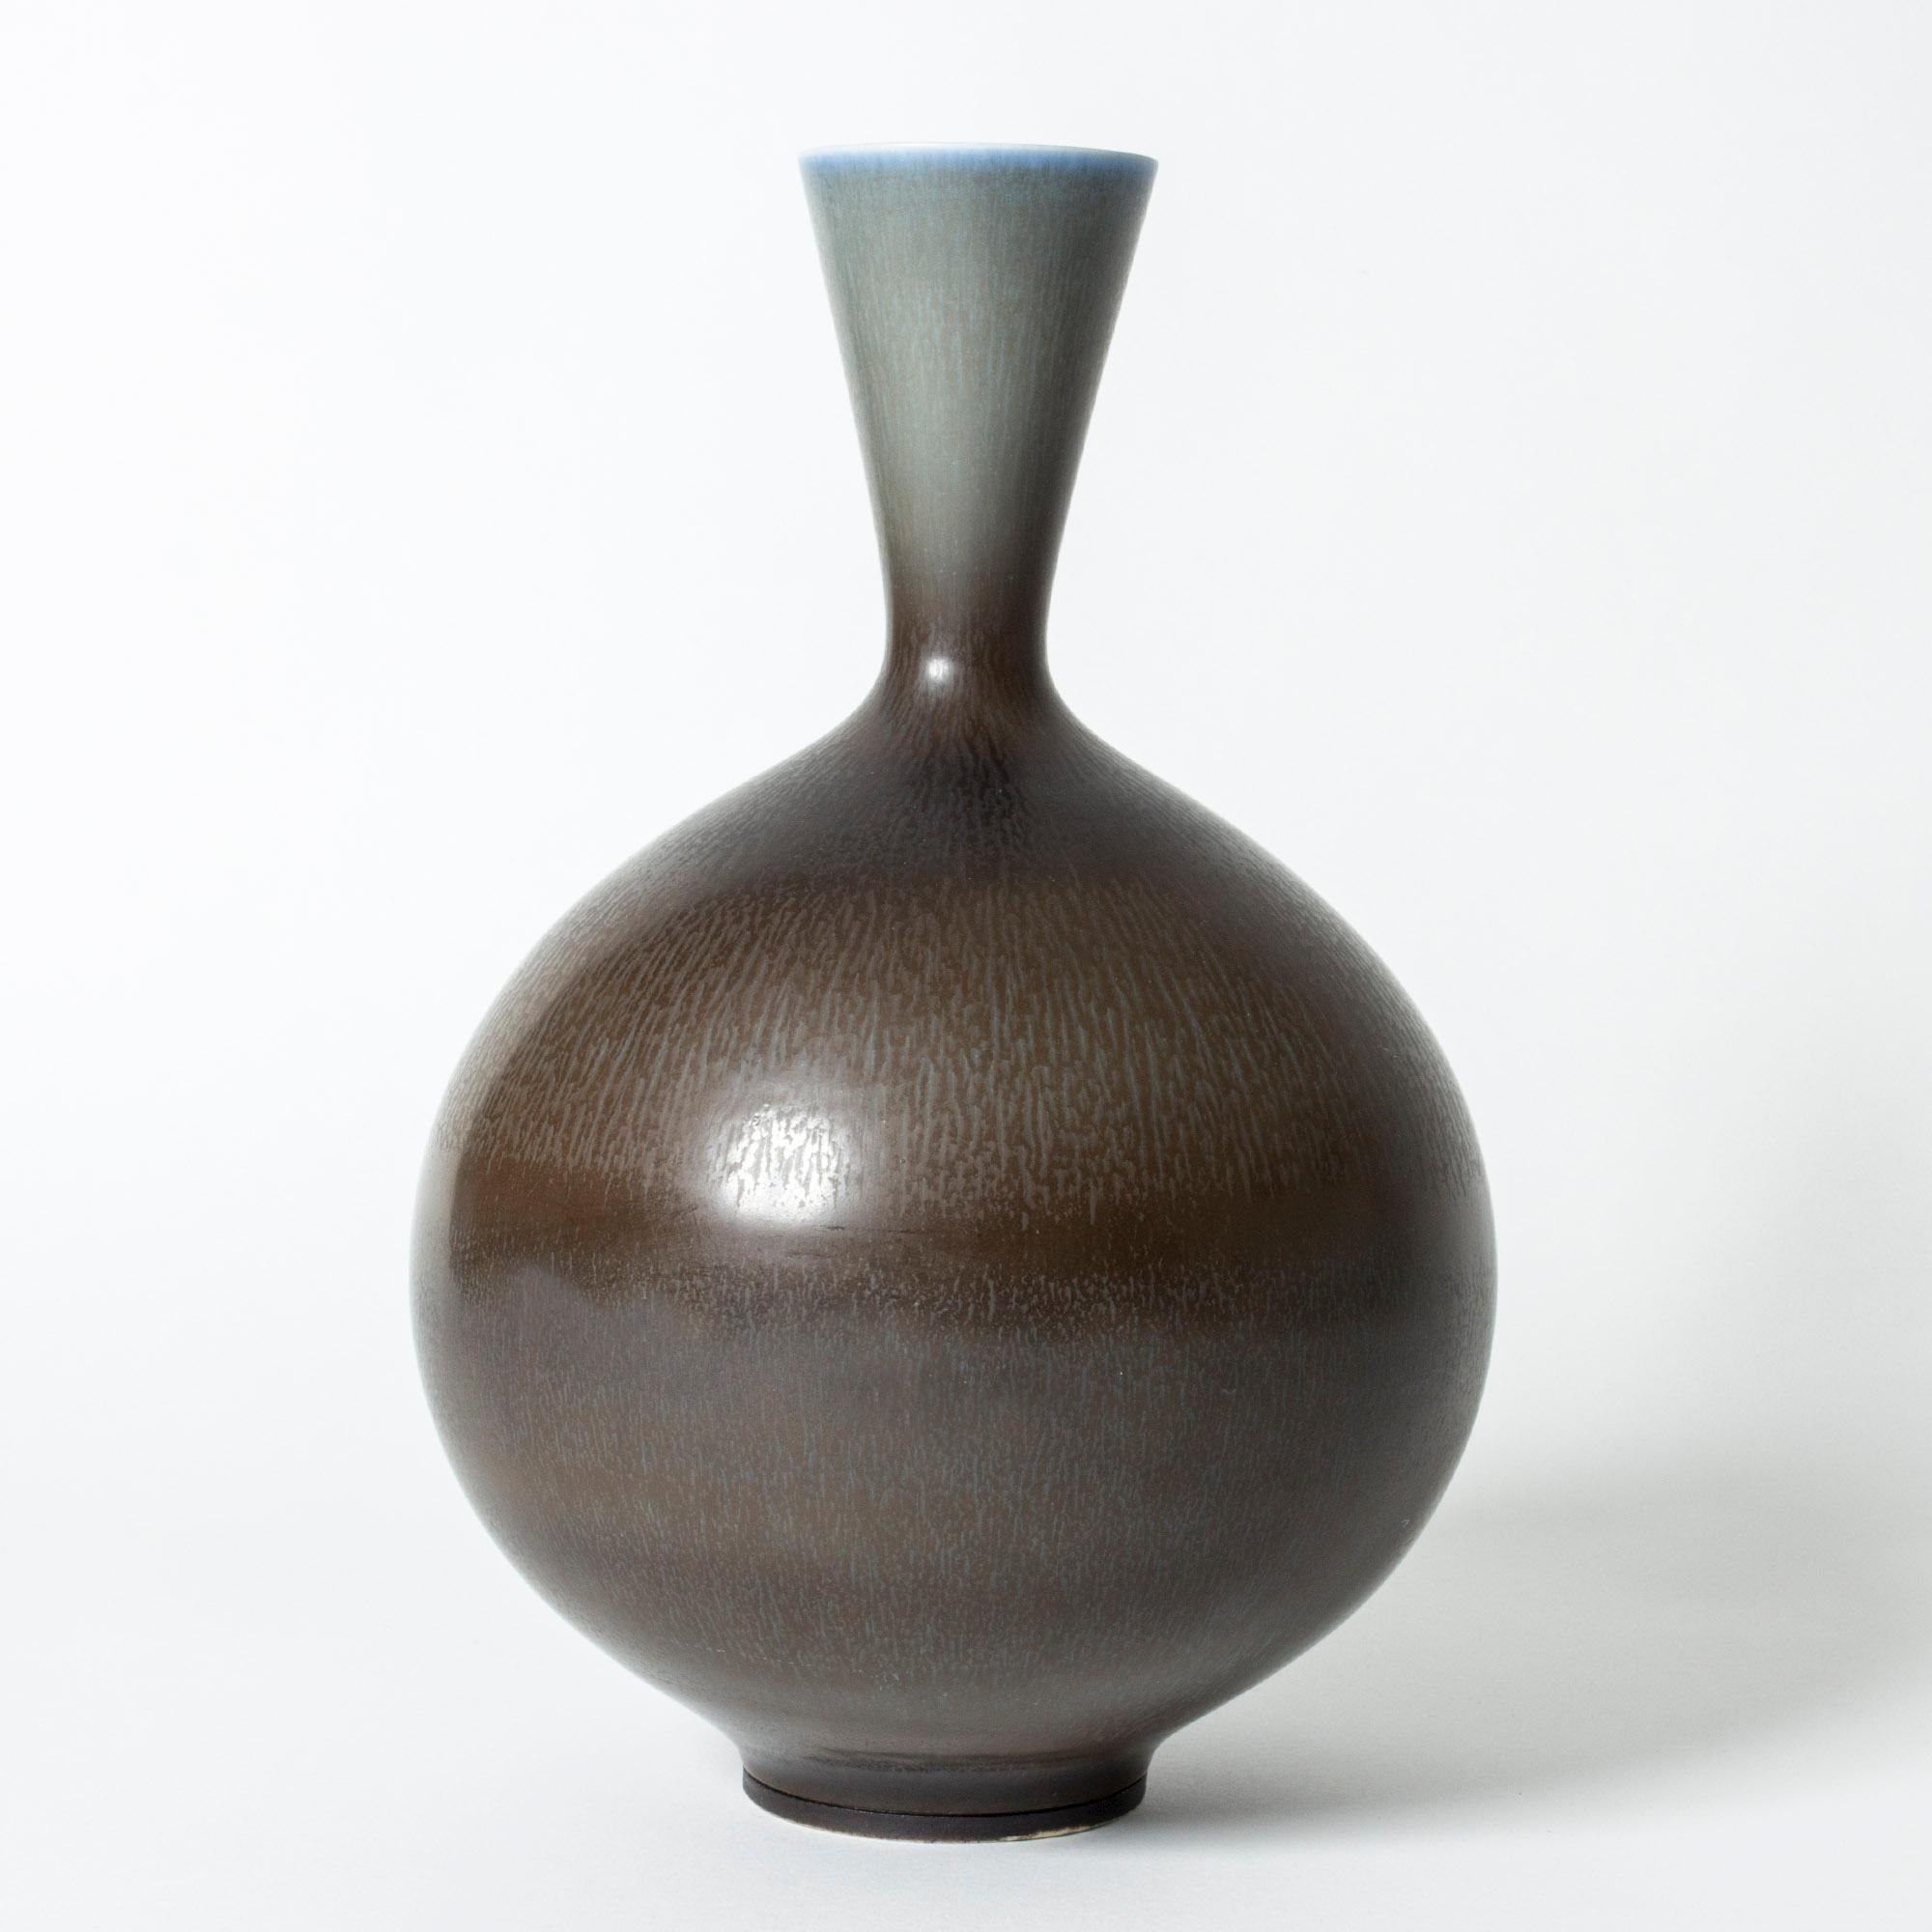 Oversized stoneware vase by Berndt Friberg, in a beautiful round form with a tapering neck. Brown hare’s fur glaze blending into pale blue.

Berndt Friberg was a Swedish ceramicist, renowned for his stoneware vases and vessels for Gustavsberg. His